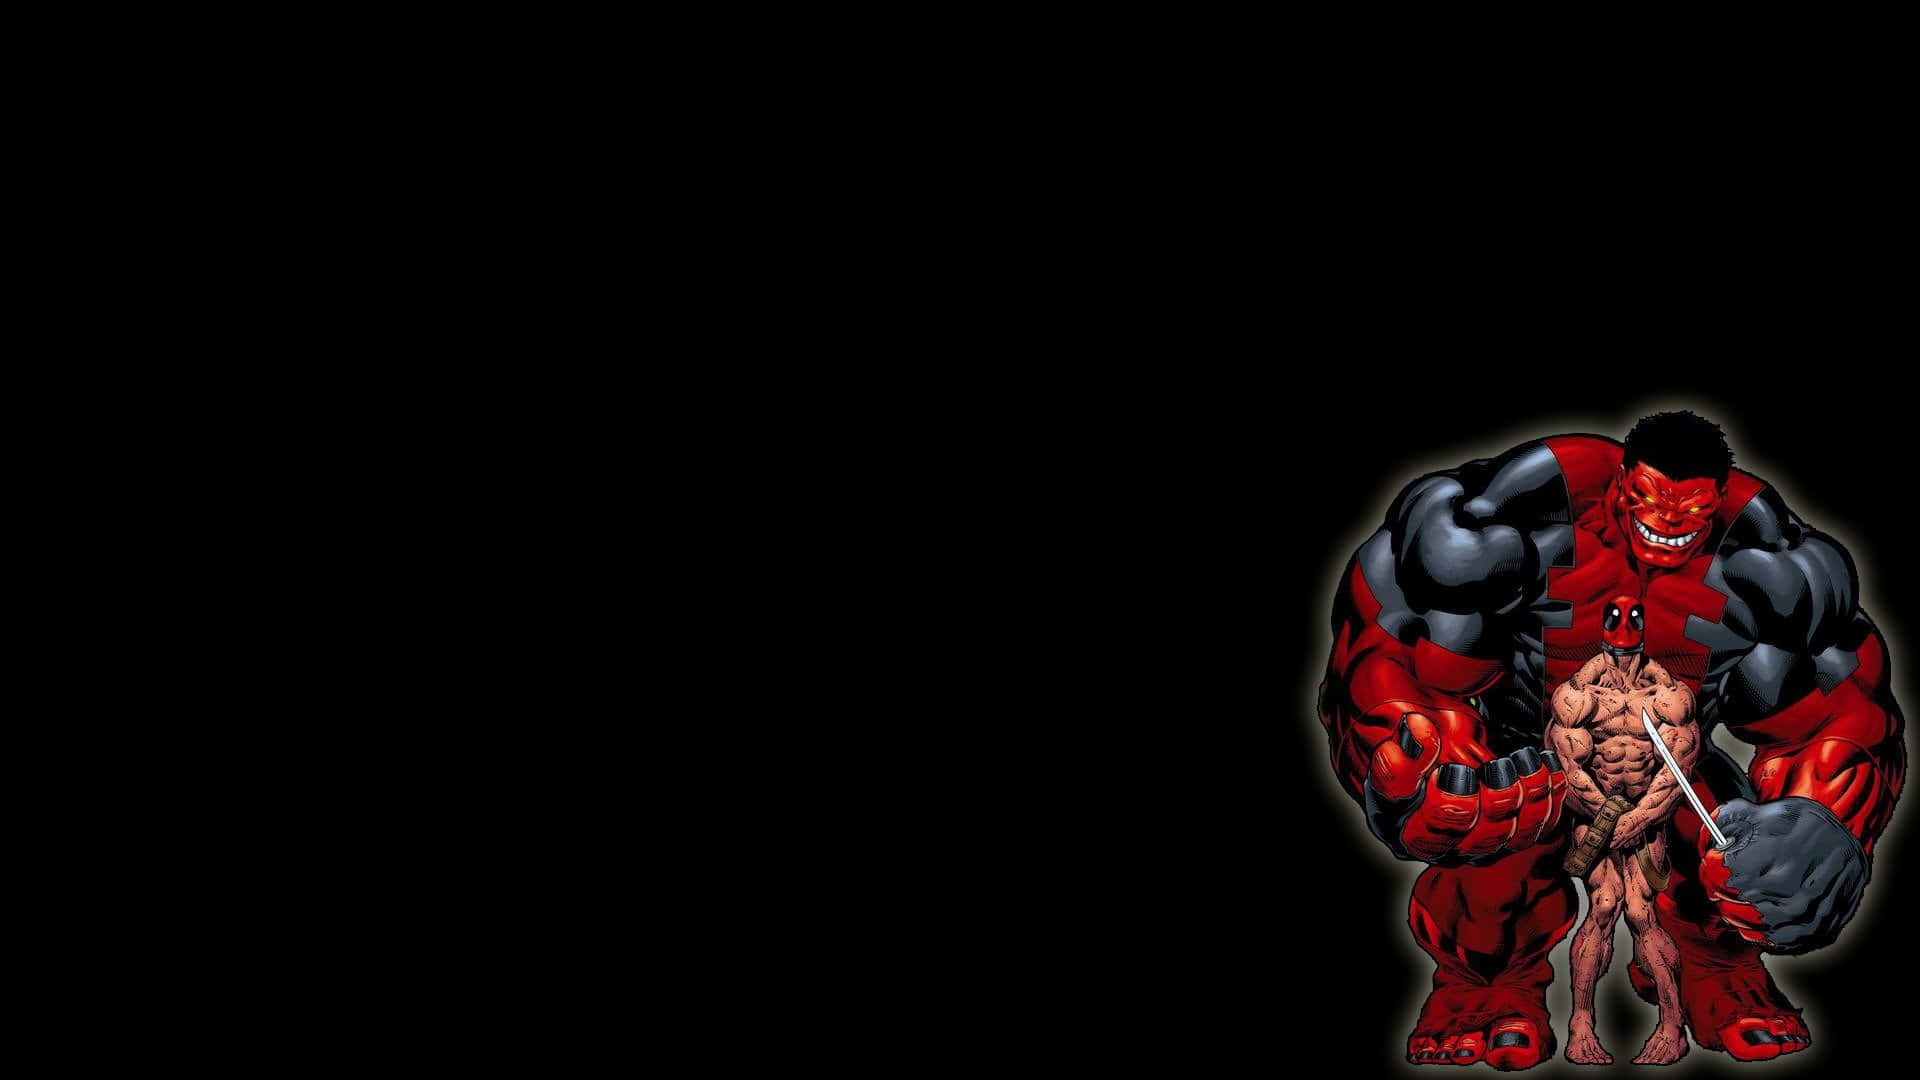 "The Black Deadpool - A Different Kind of Hero" Wallpaper